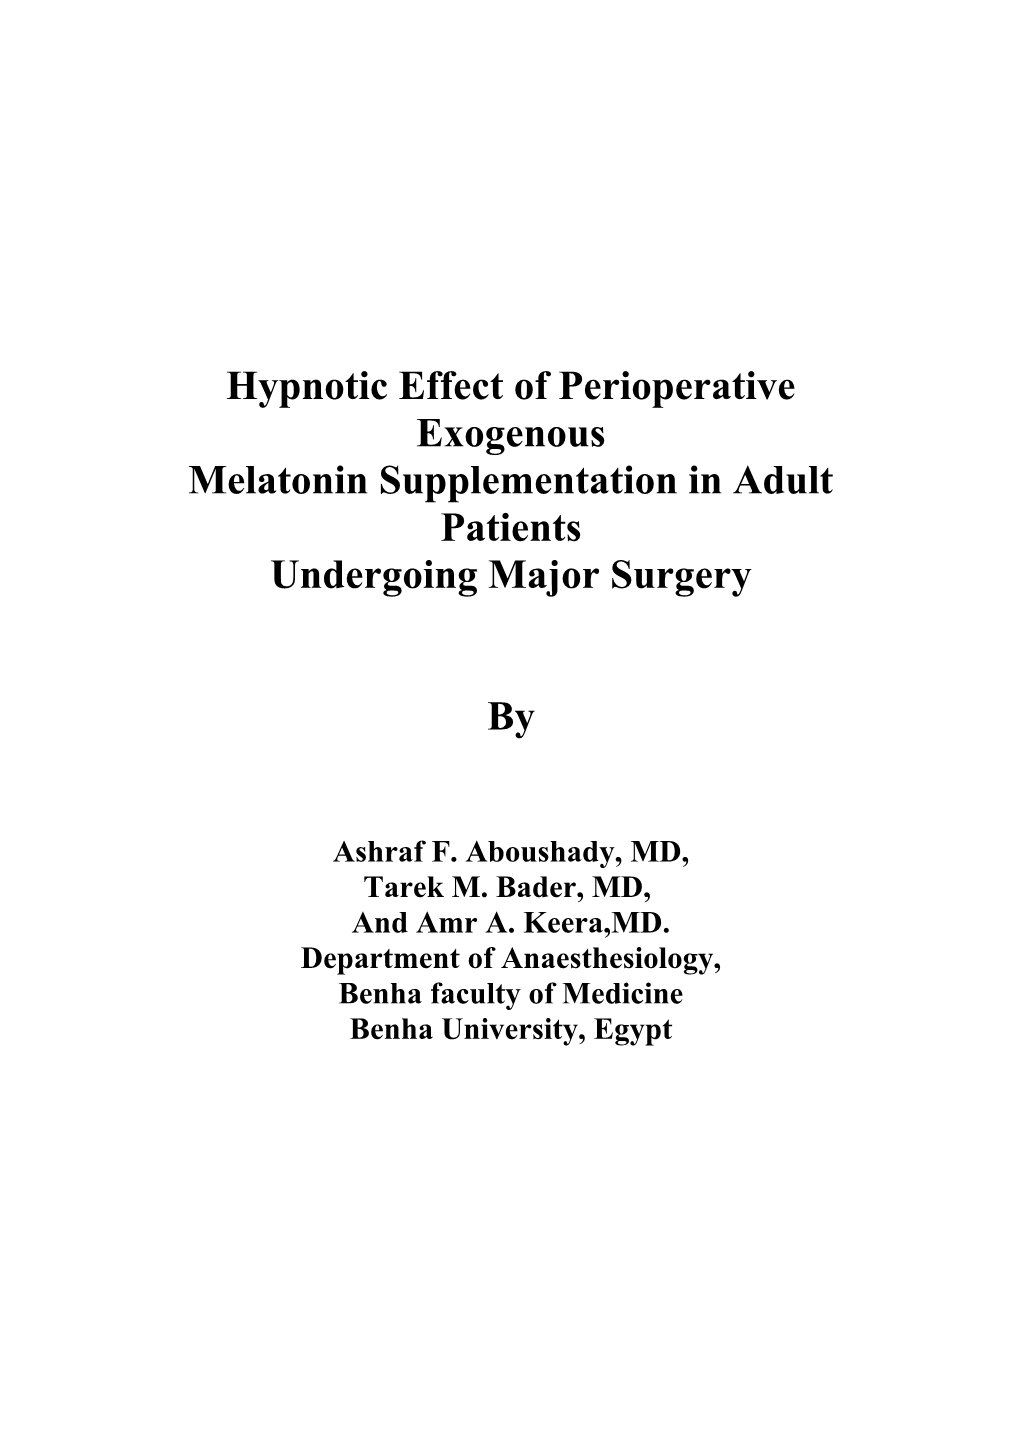 Hypnotic Effect of Perioperative Exogenous